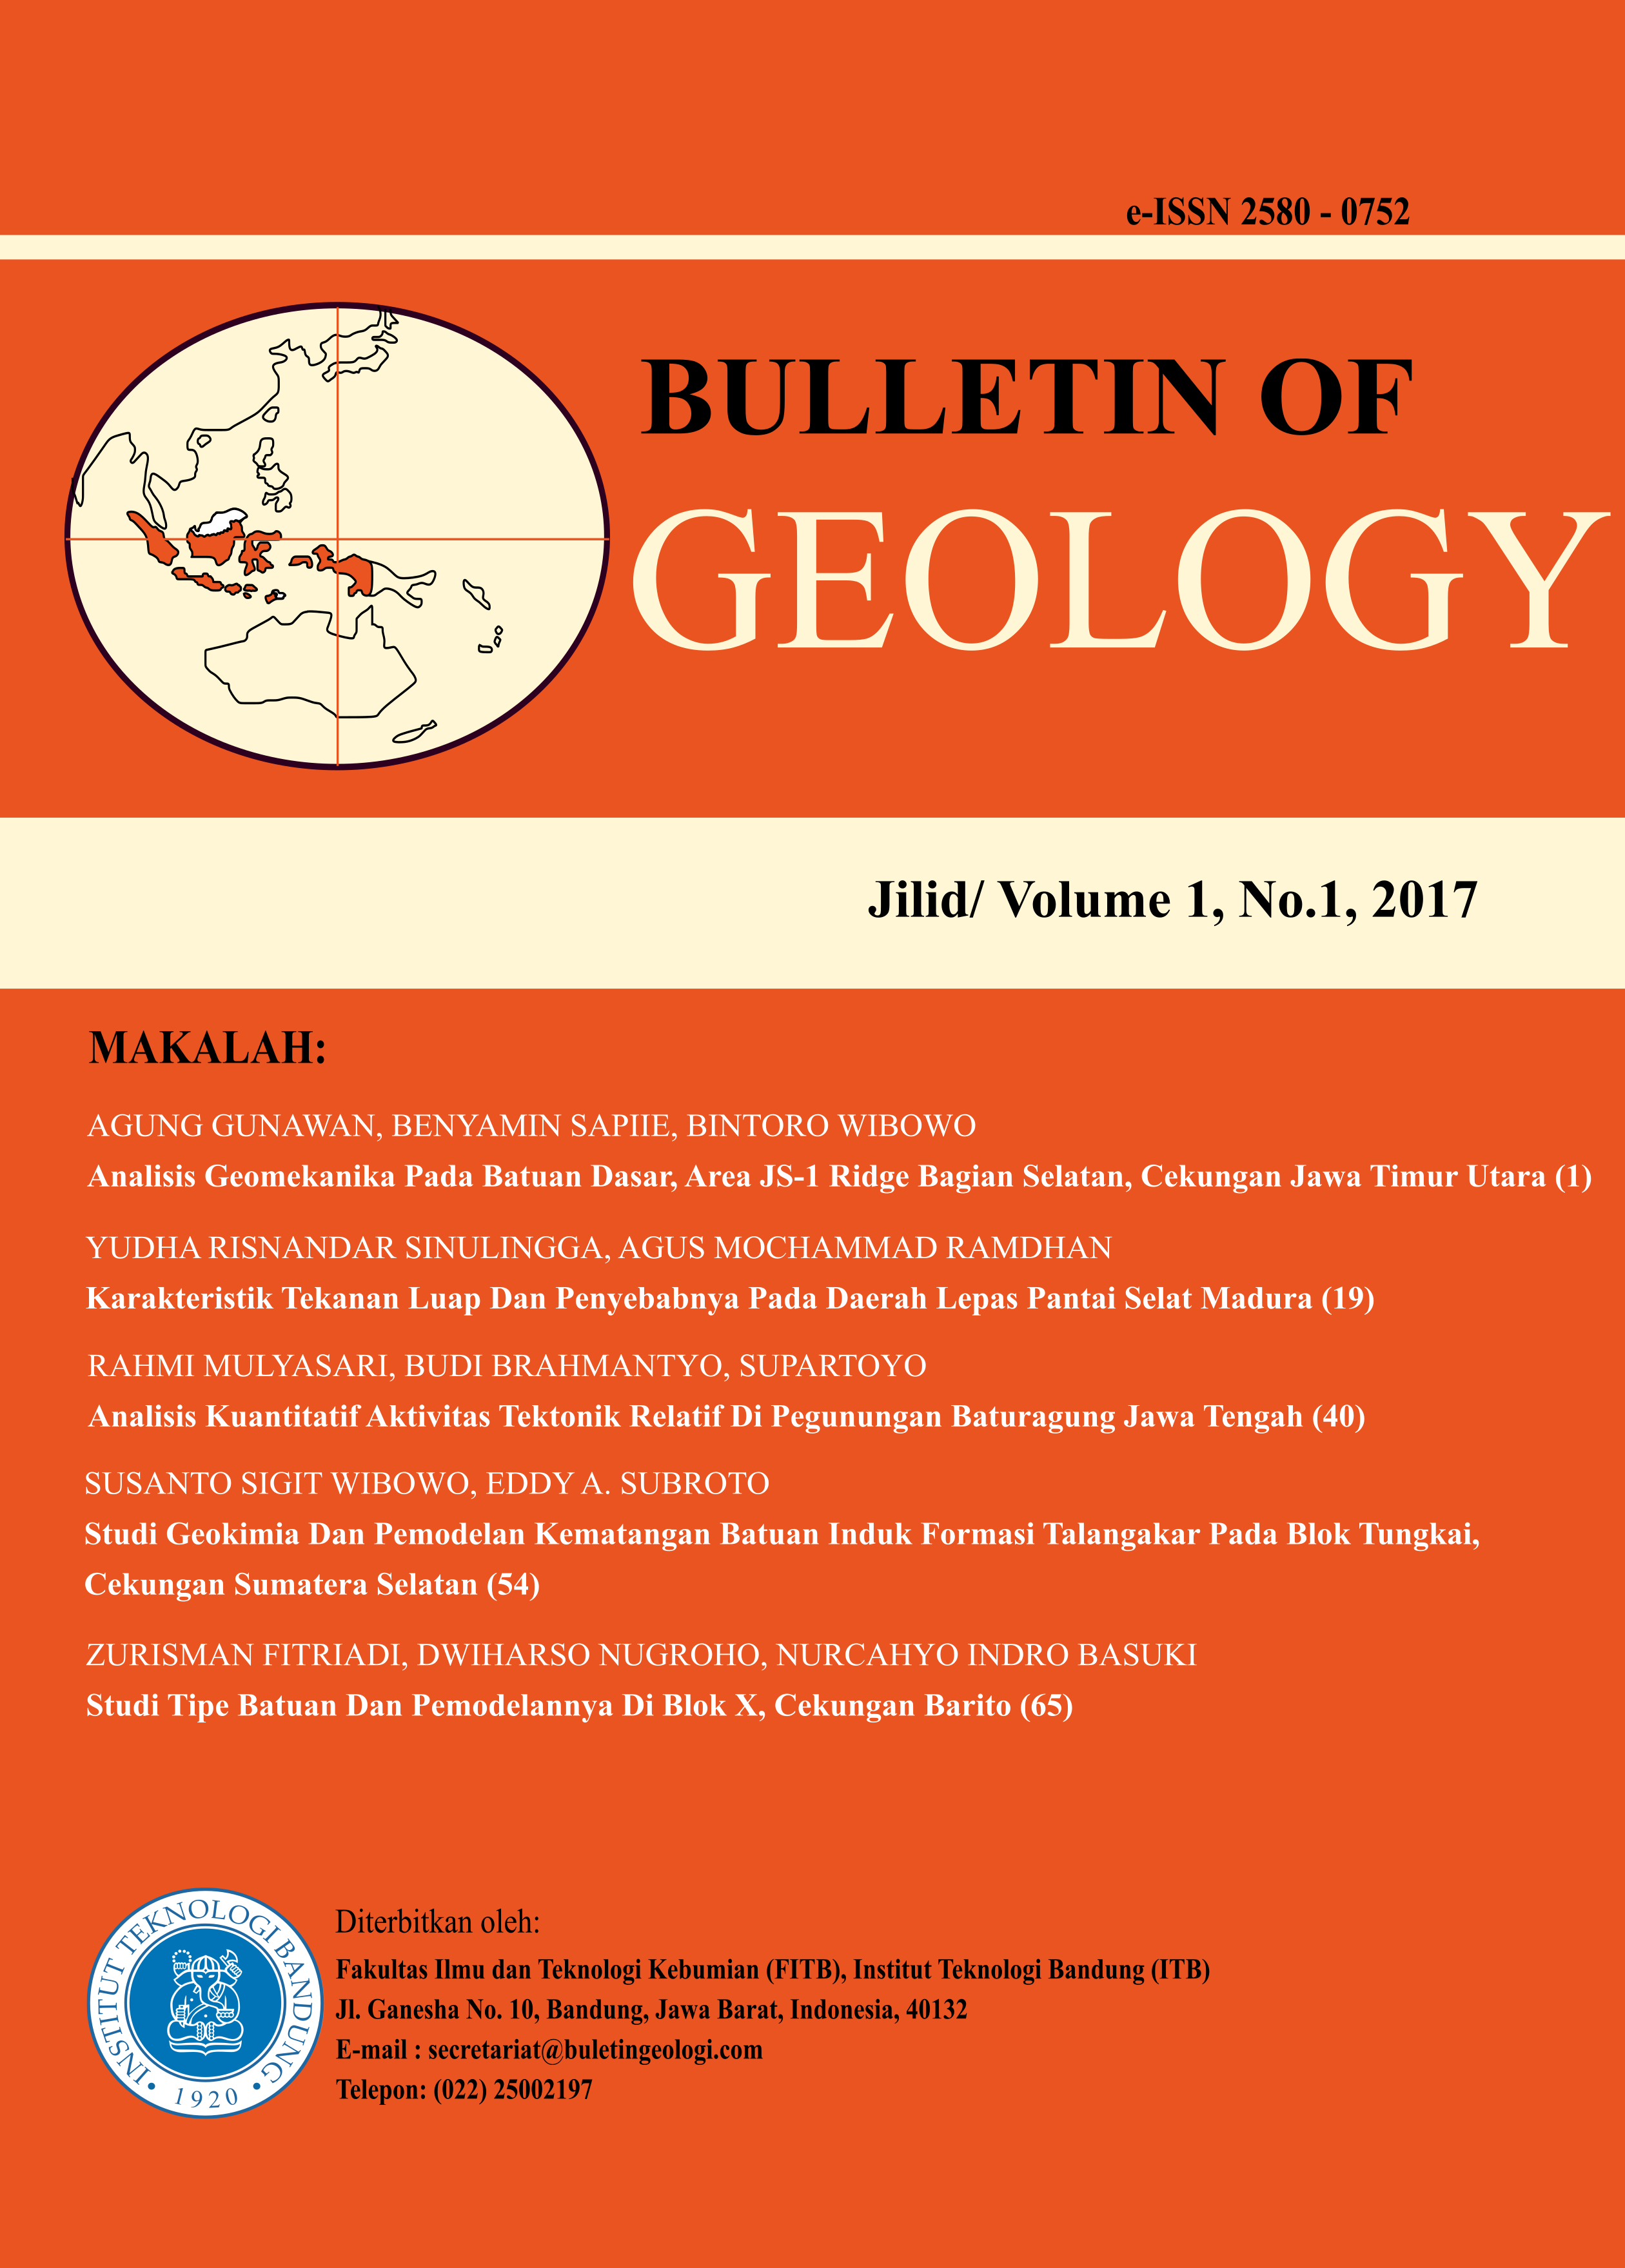 Bulletin of Geology  Vol 1 No 1 (2017) Cover